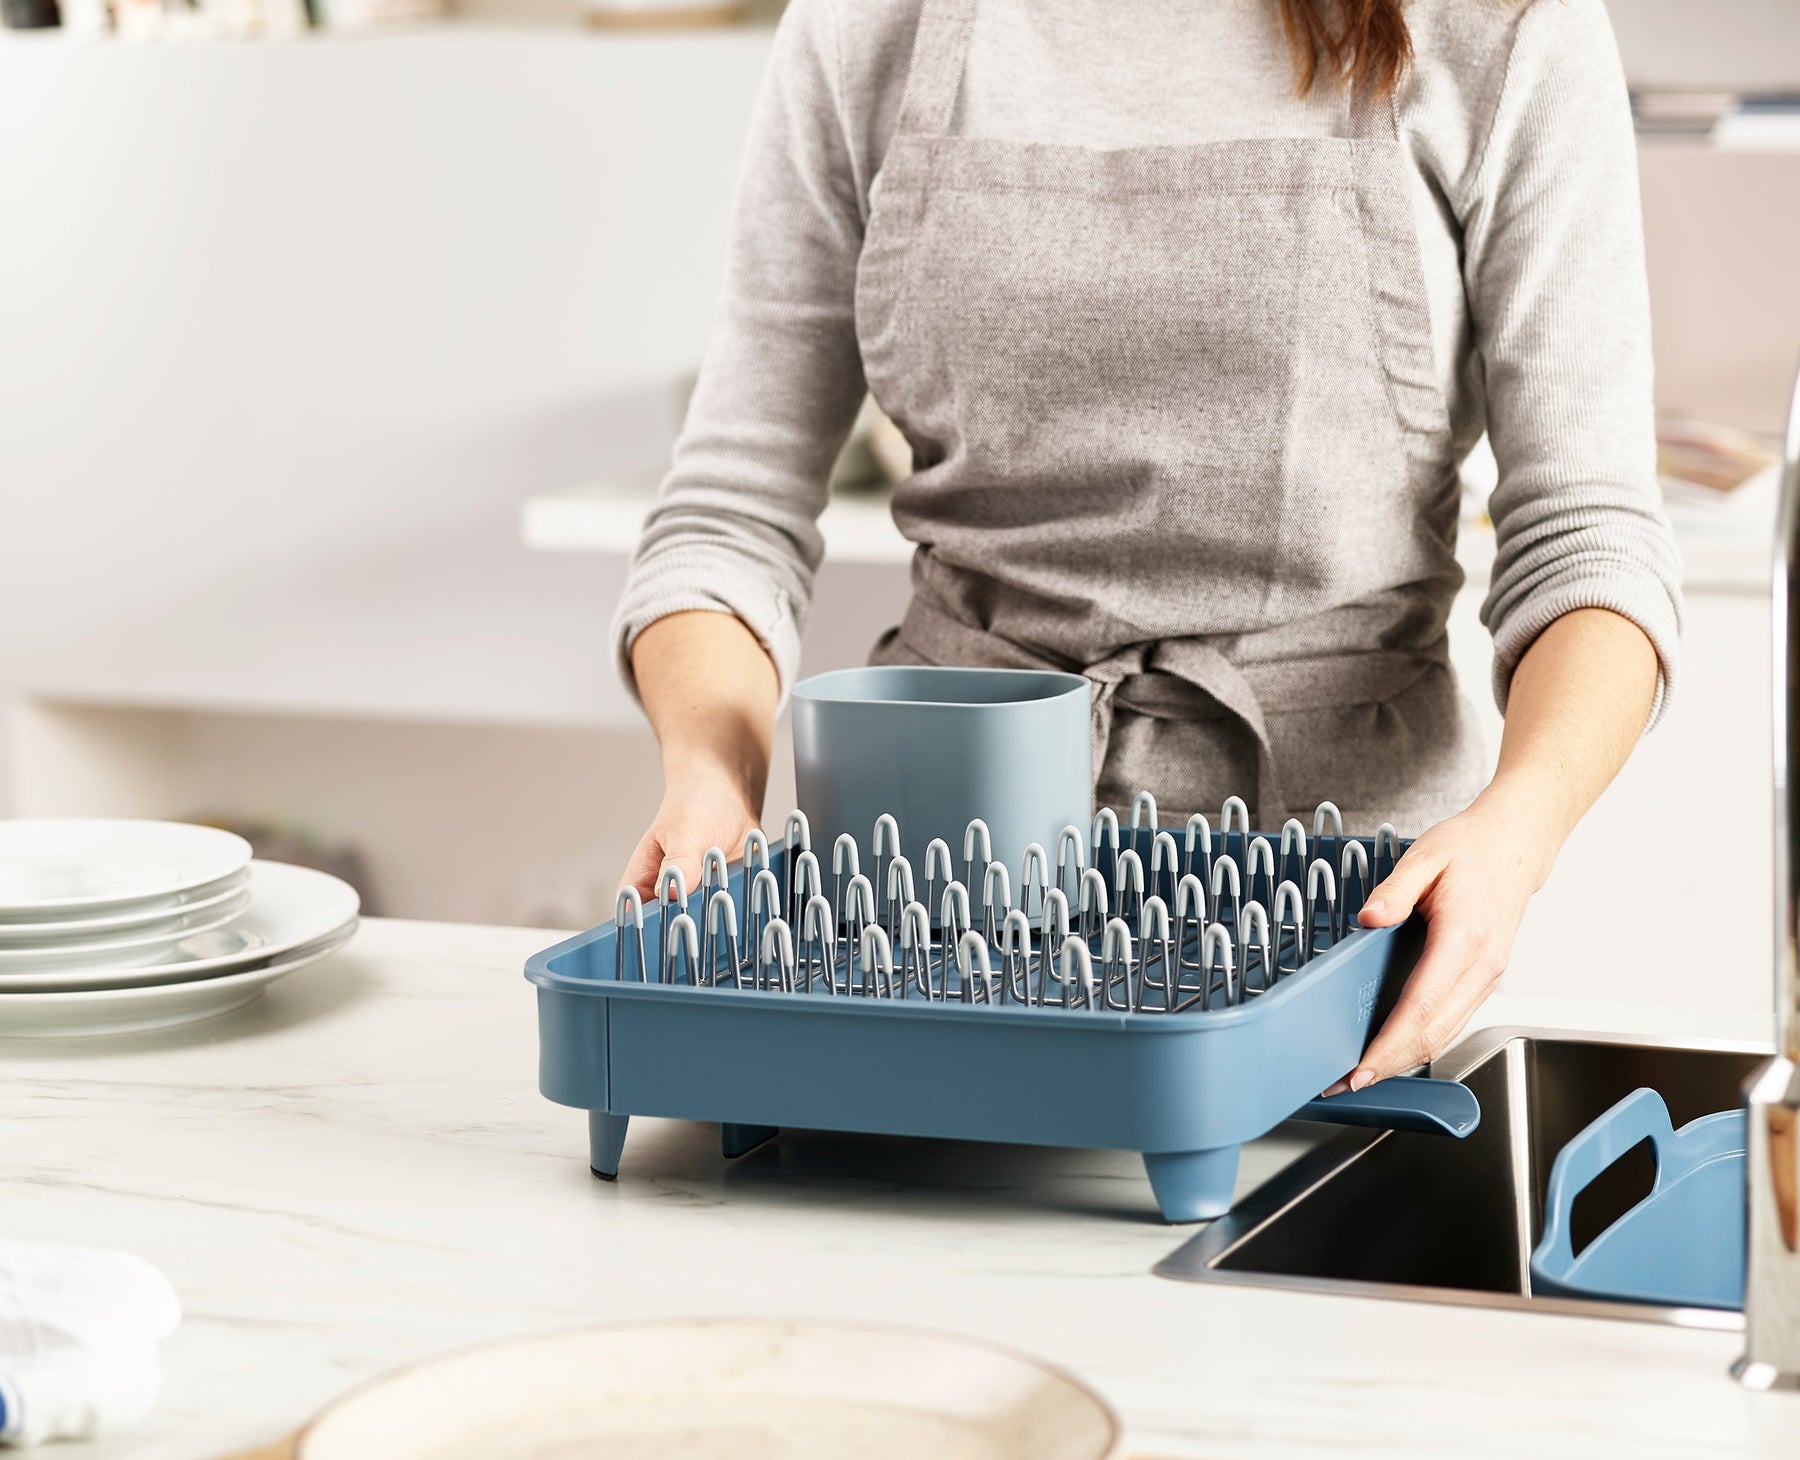 The Extend Dish Drainer compacts to fit your sink needs